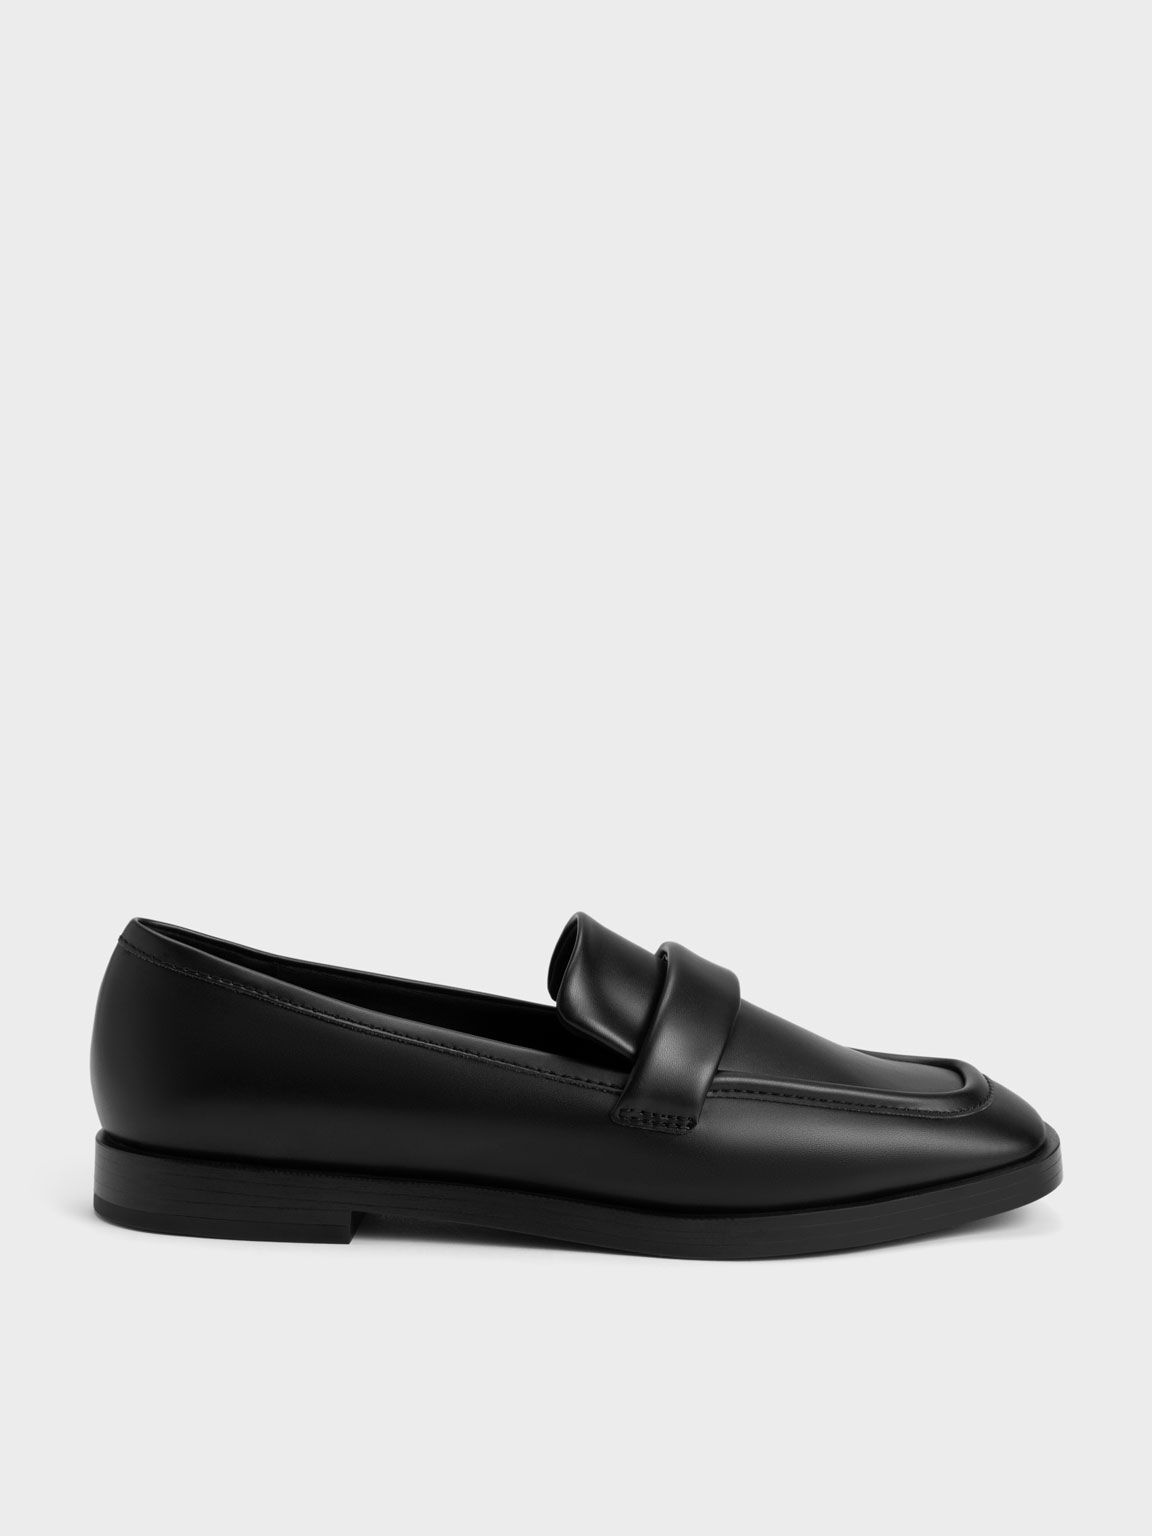 Square-Toe Penny Loafers, Black, hi-res